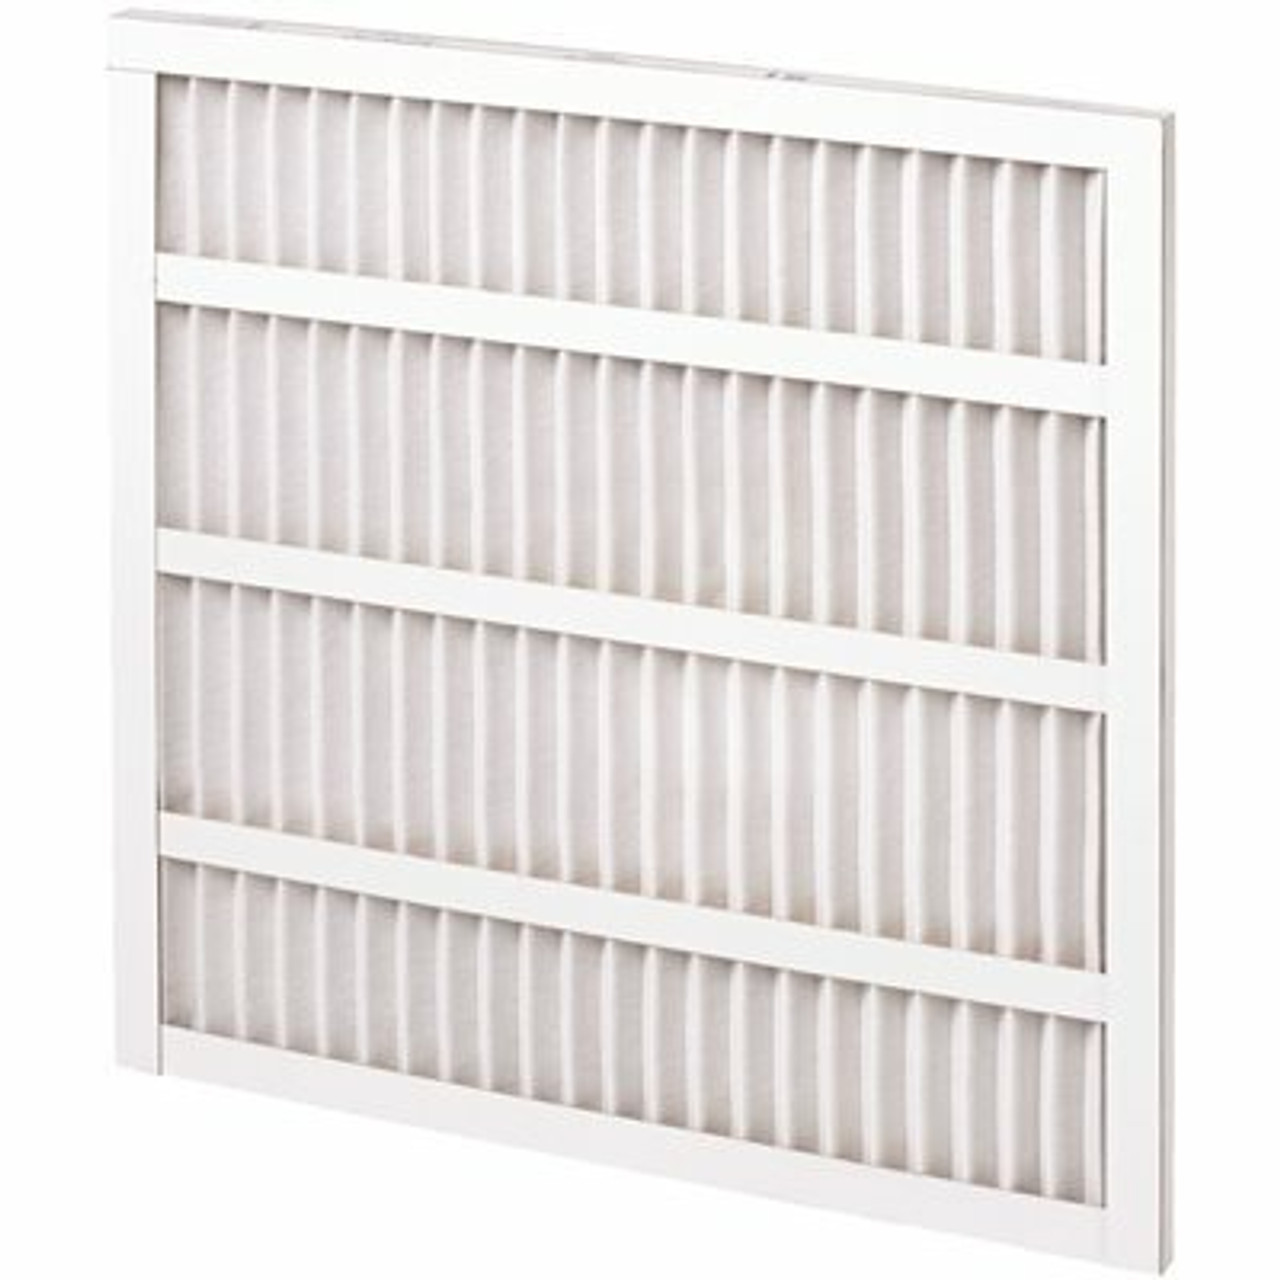 18 In. X 24 In. X 2 In. Standard Capacity Self Supported Pleated Air Filter MERV 8 (12-Case)